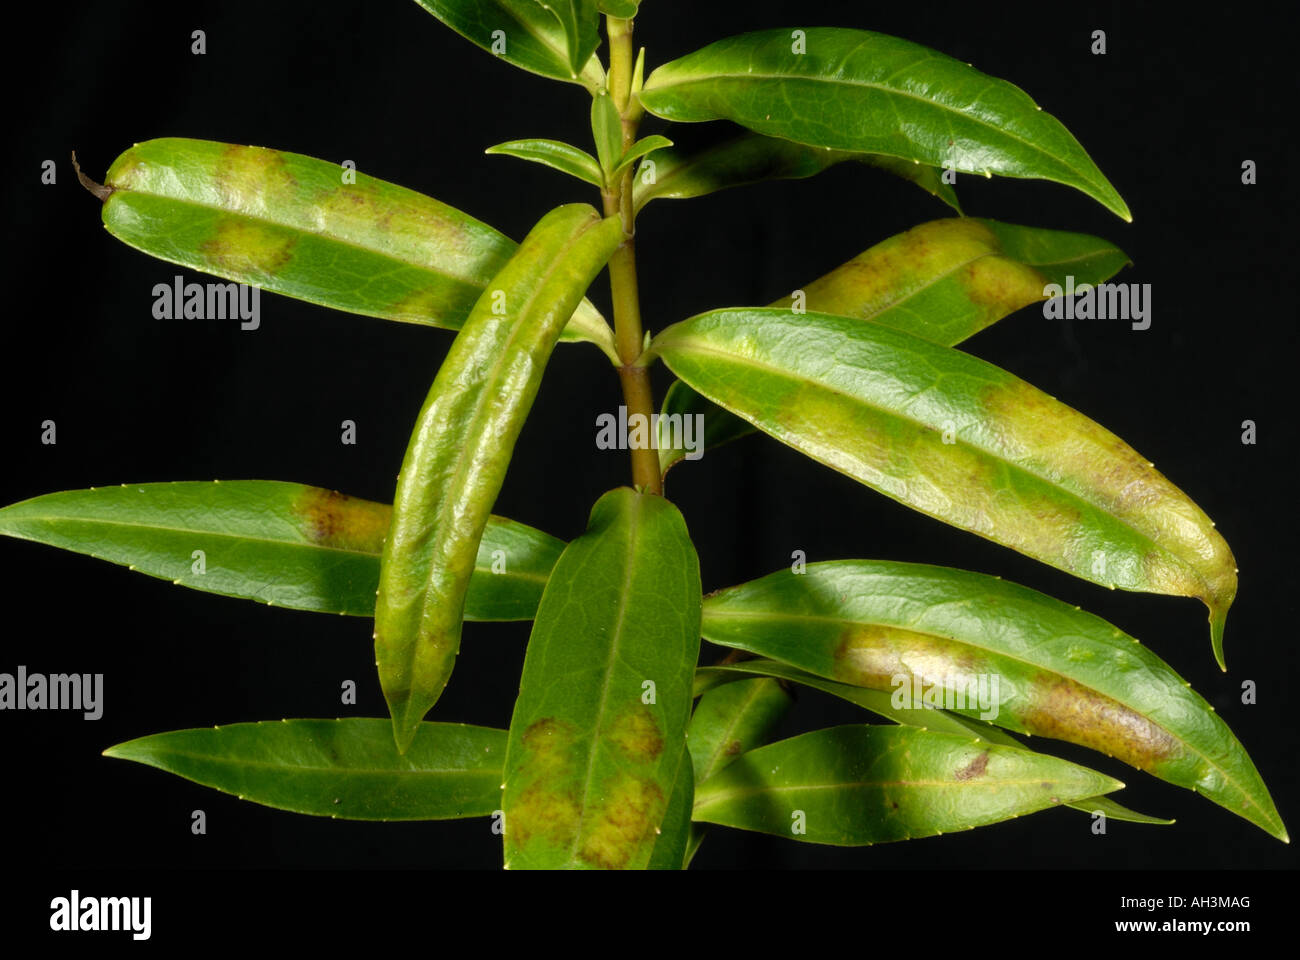 Fungal lesion patches of downy mildew Peronospora grisea on hebe leaf upper surface Stock Photo